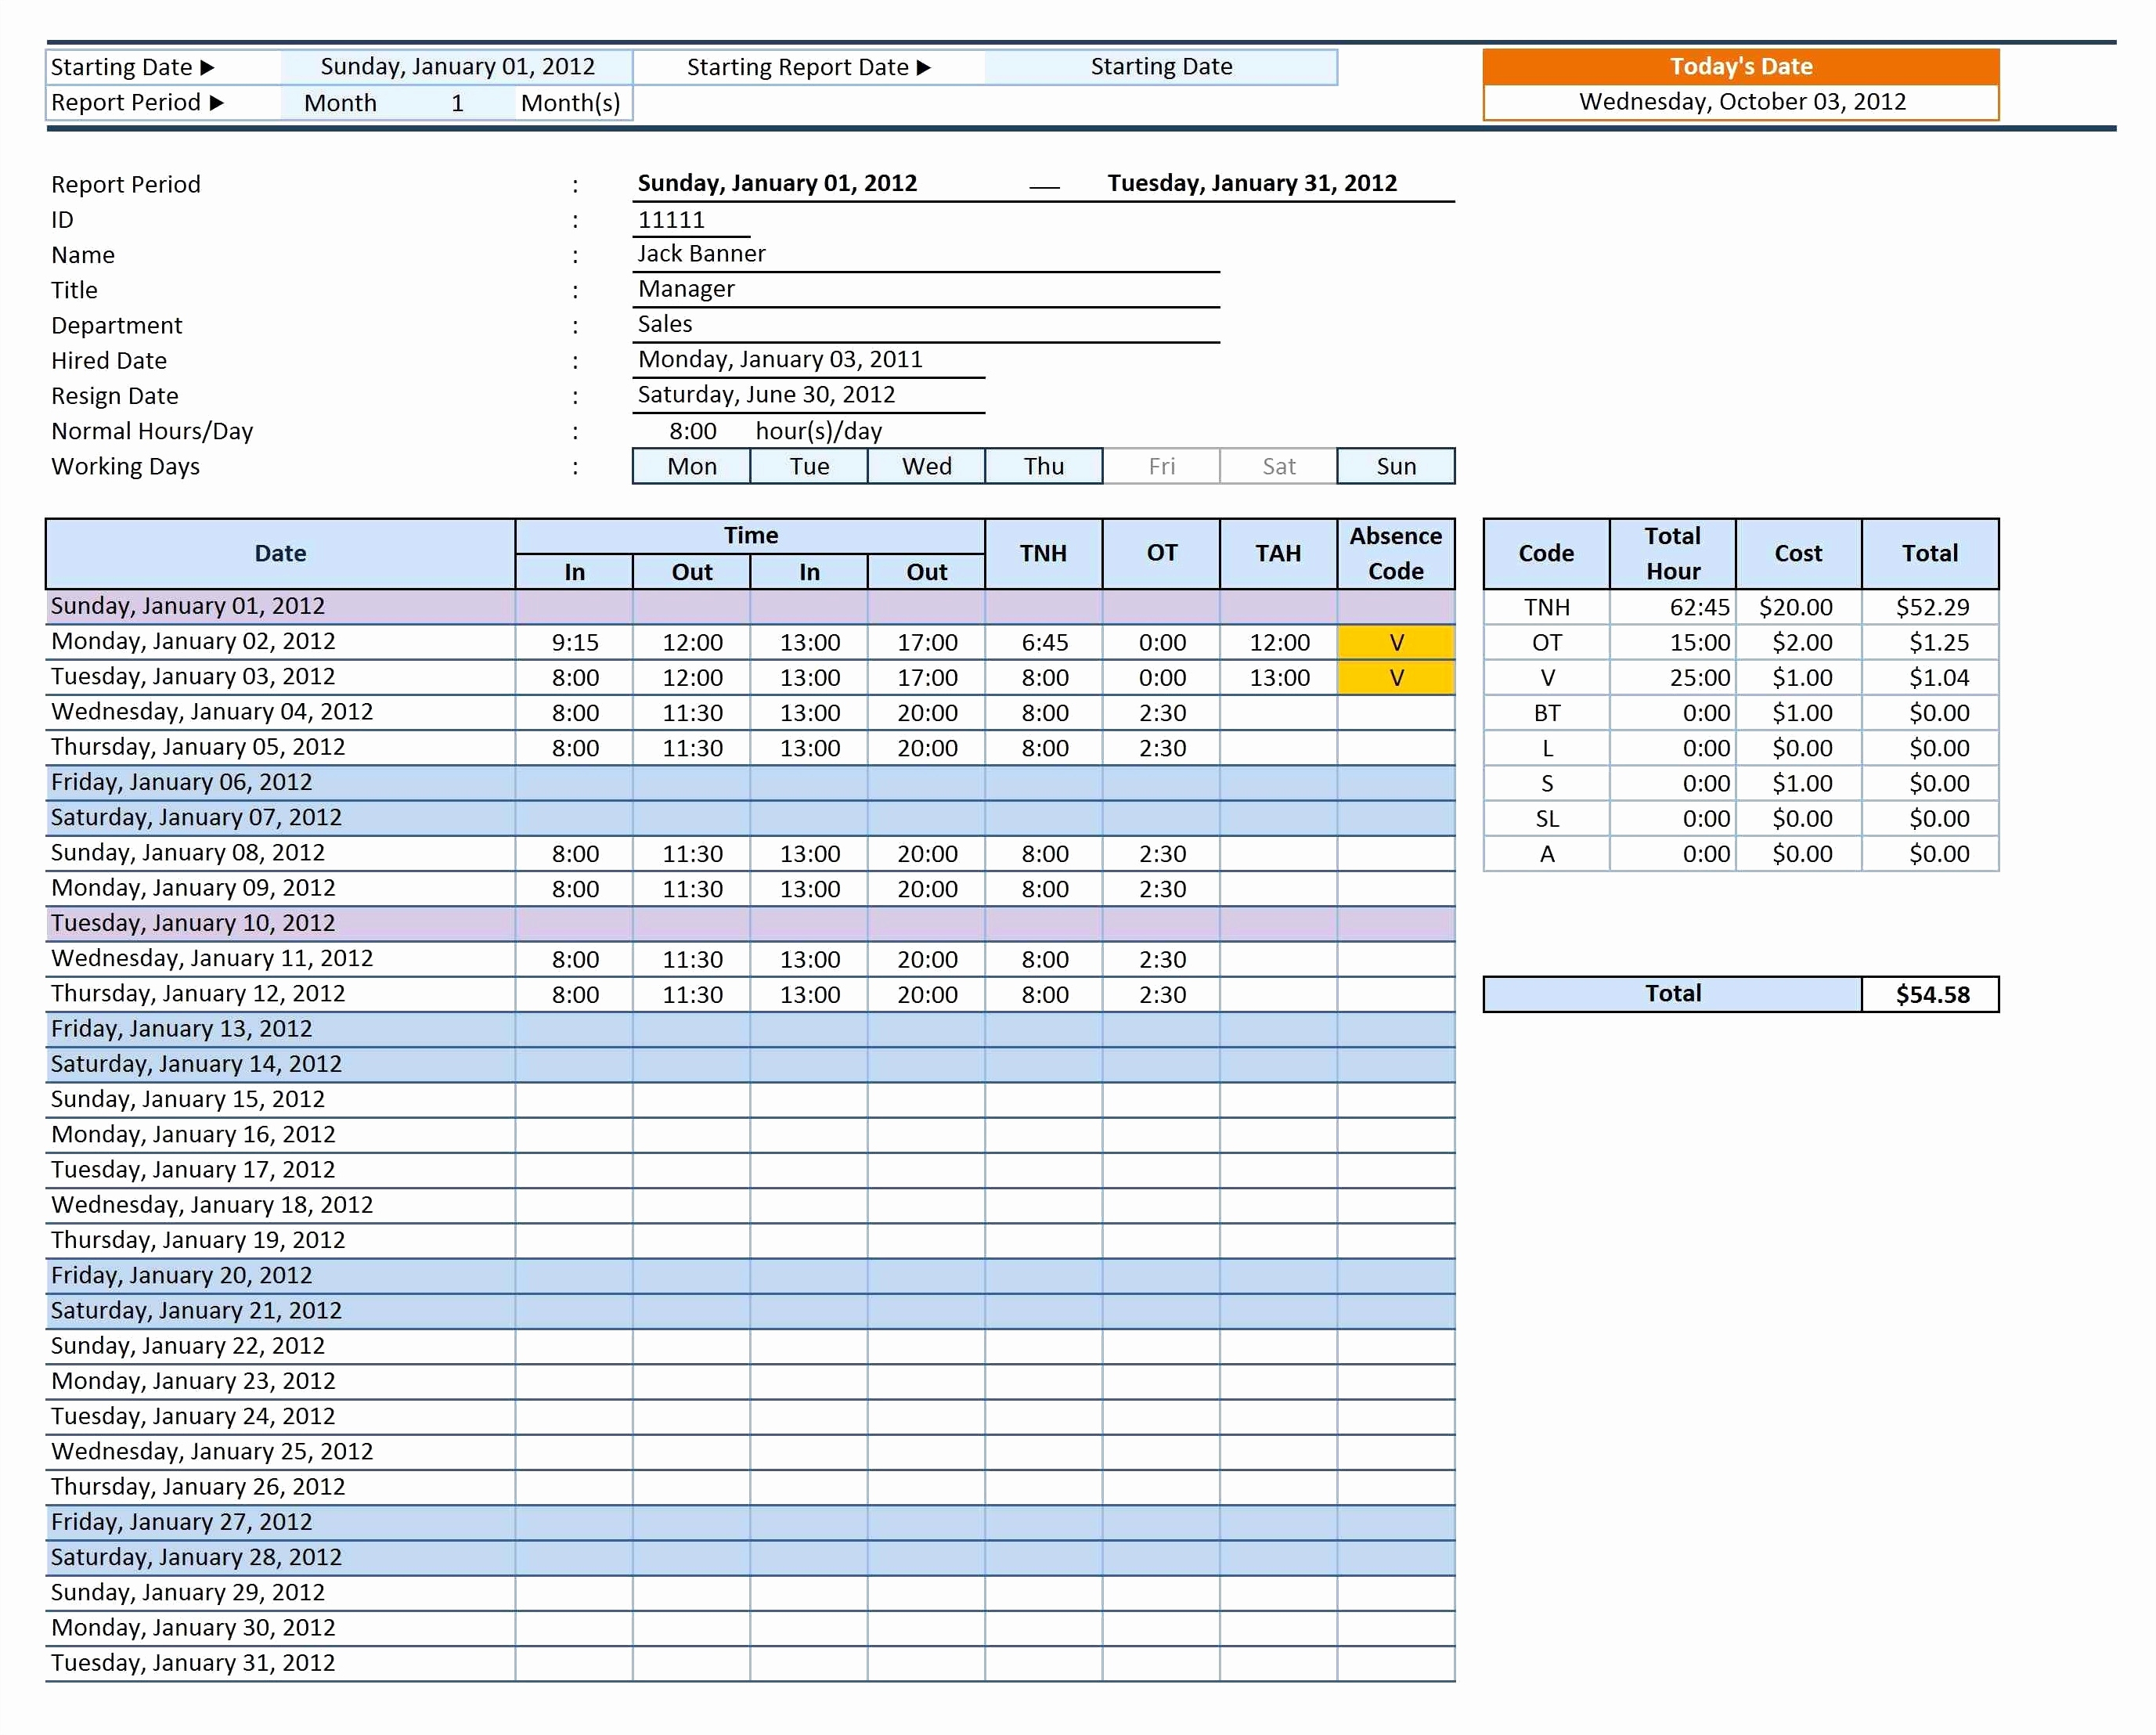 Free Cma Spreadsheet For Free Cma Spreadsheet As Excel Personal Budget Sheet How To Make An